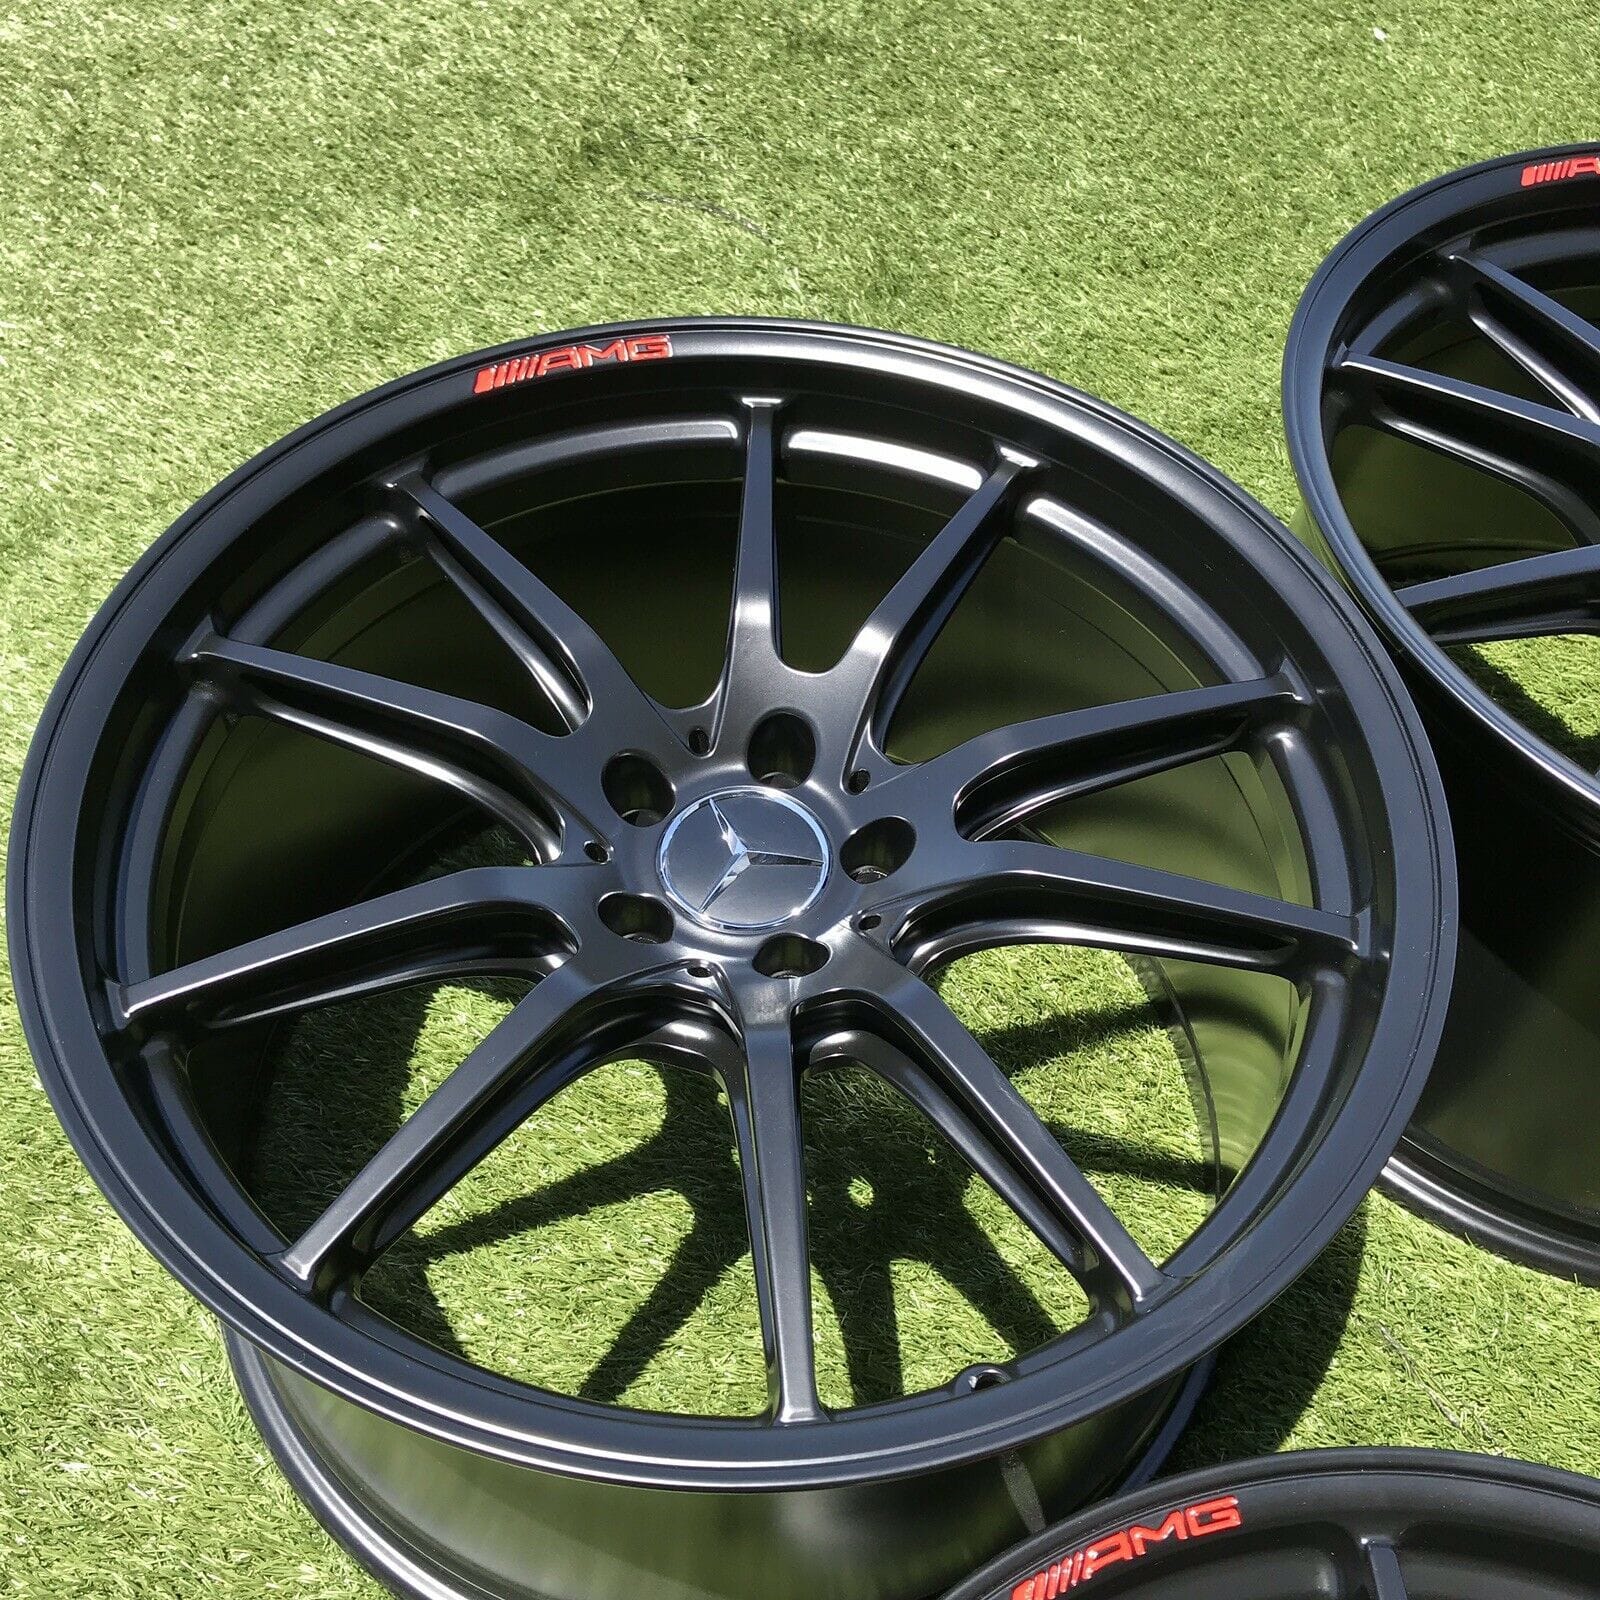 Wheels and Tires/Axles - 19" 20" Mercedes AMG Black Rims for GT-R GTS GT GTC w/ Red AMG Lettering - New - Corona, CA 92882, United States